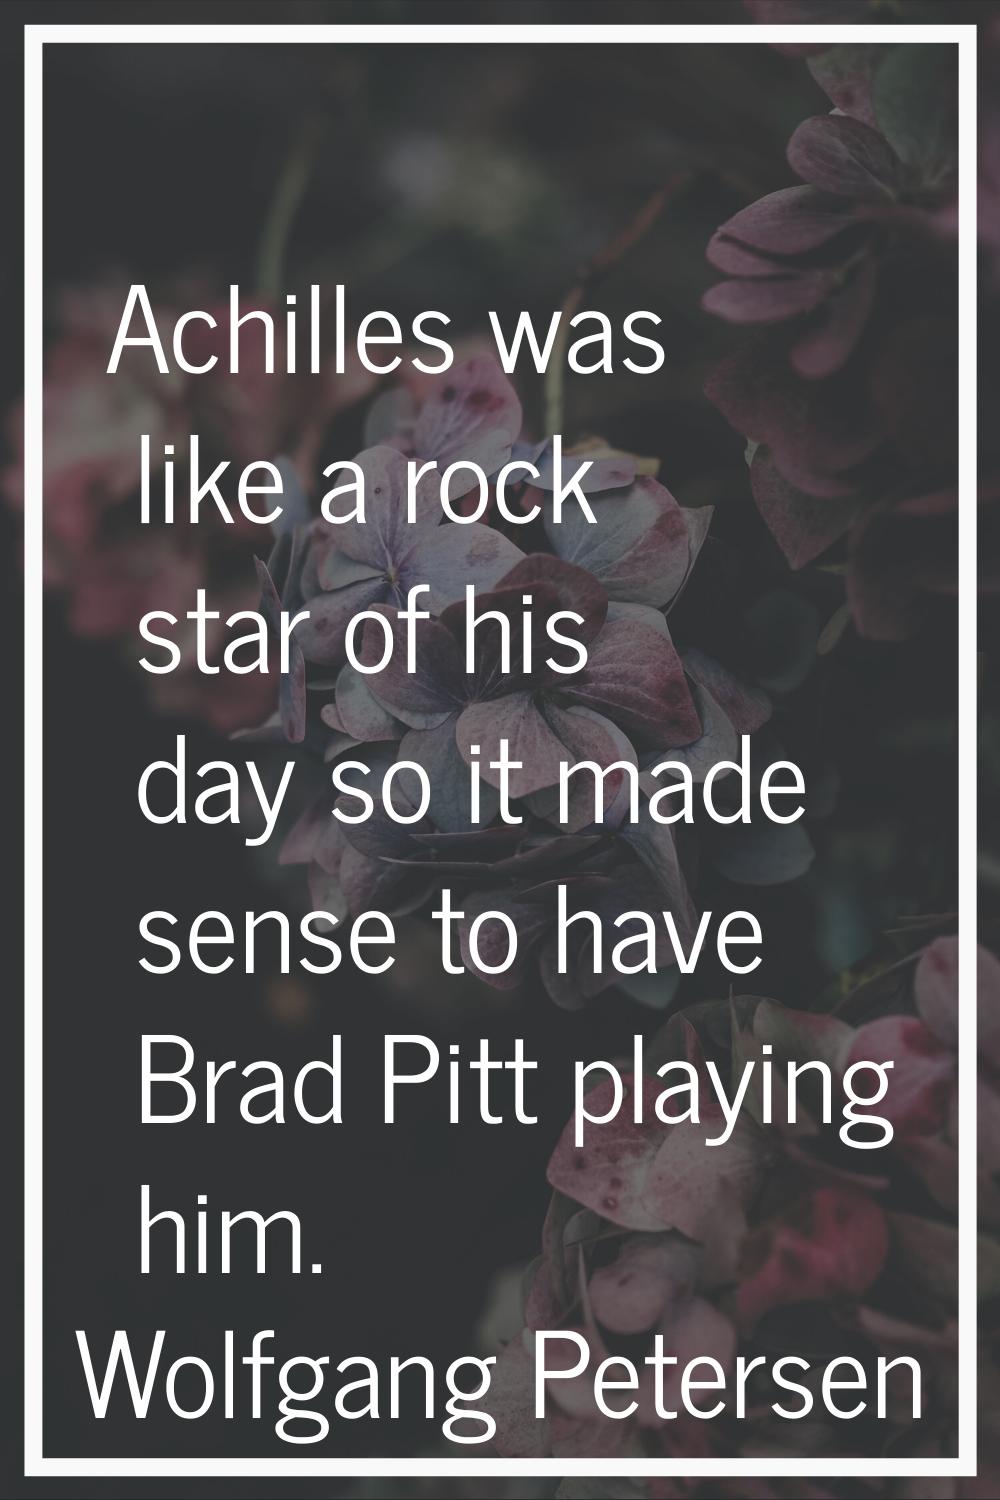 Achilles was like a rock star of his day so it made sense to have Brad Pitt playing him.